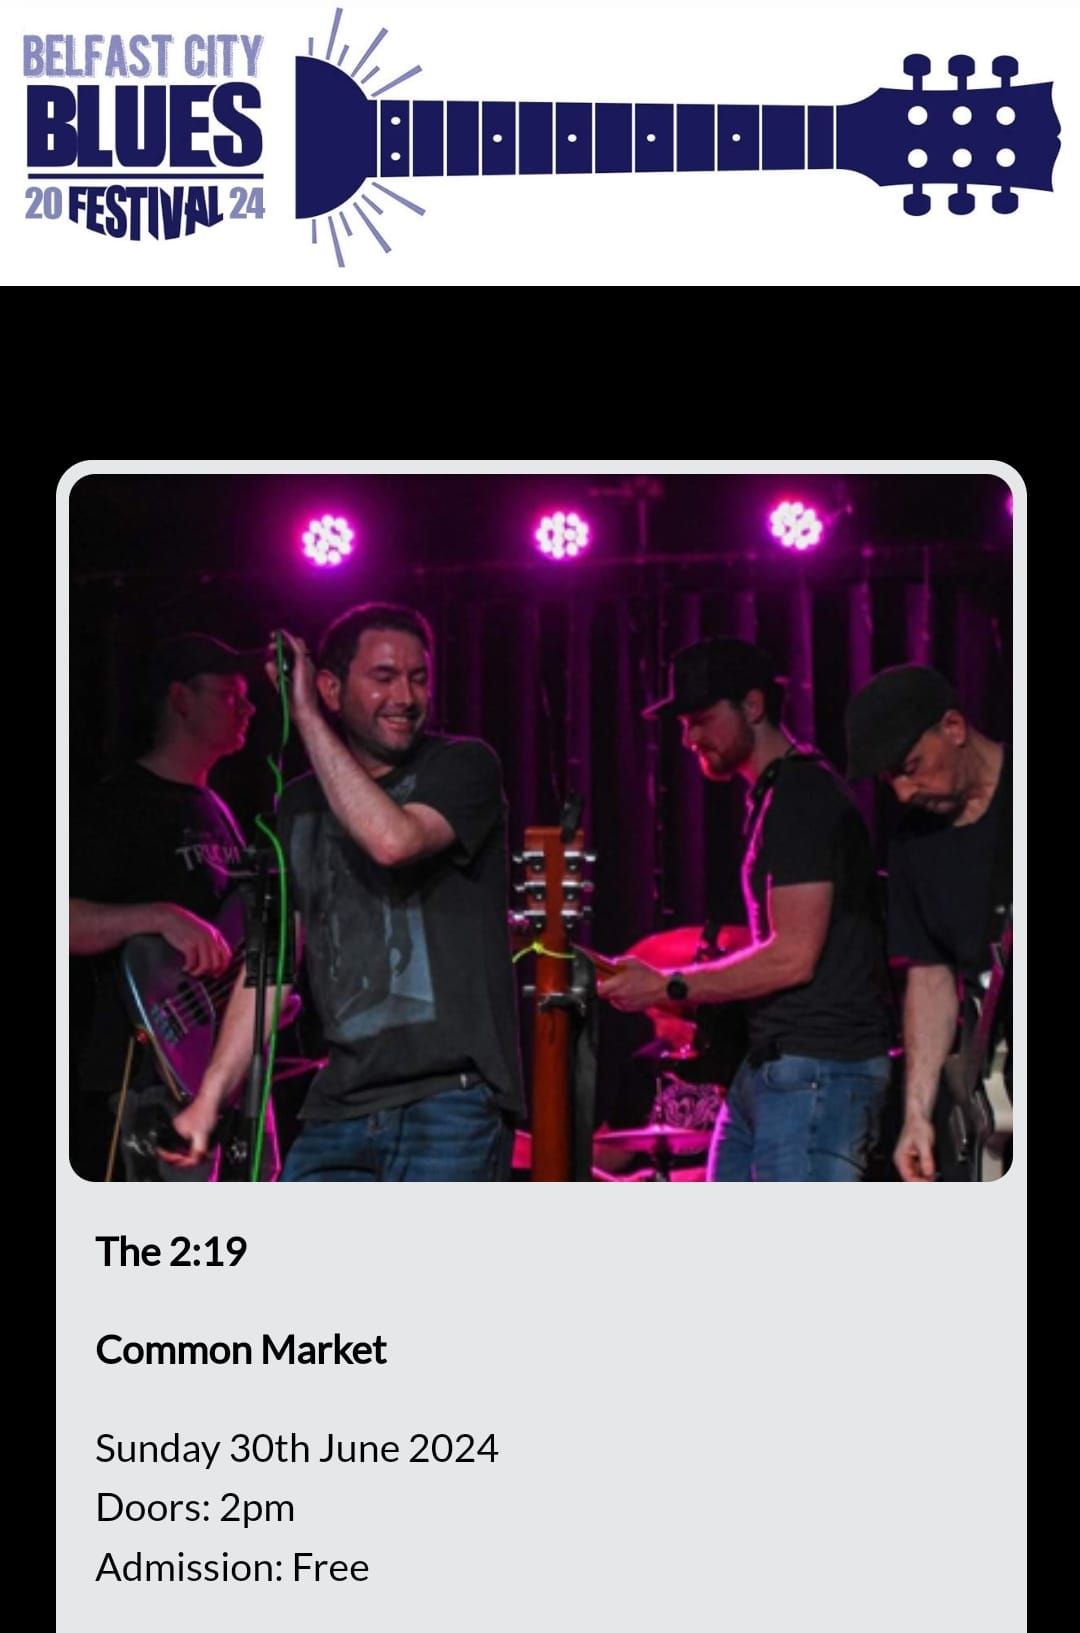 The 2:19 at Belfast City Blues Festival - Free Entry